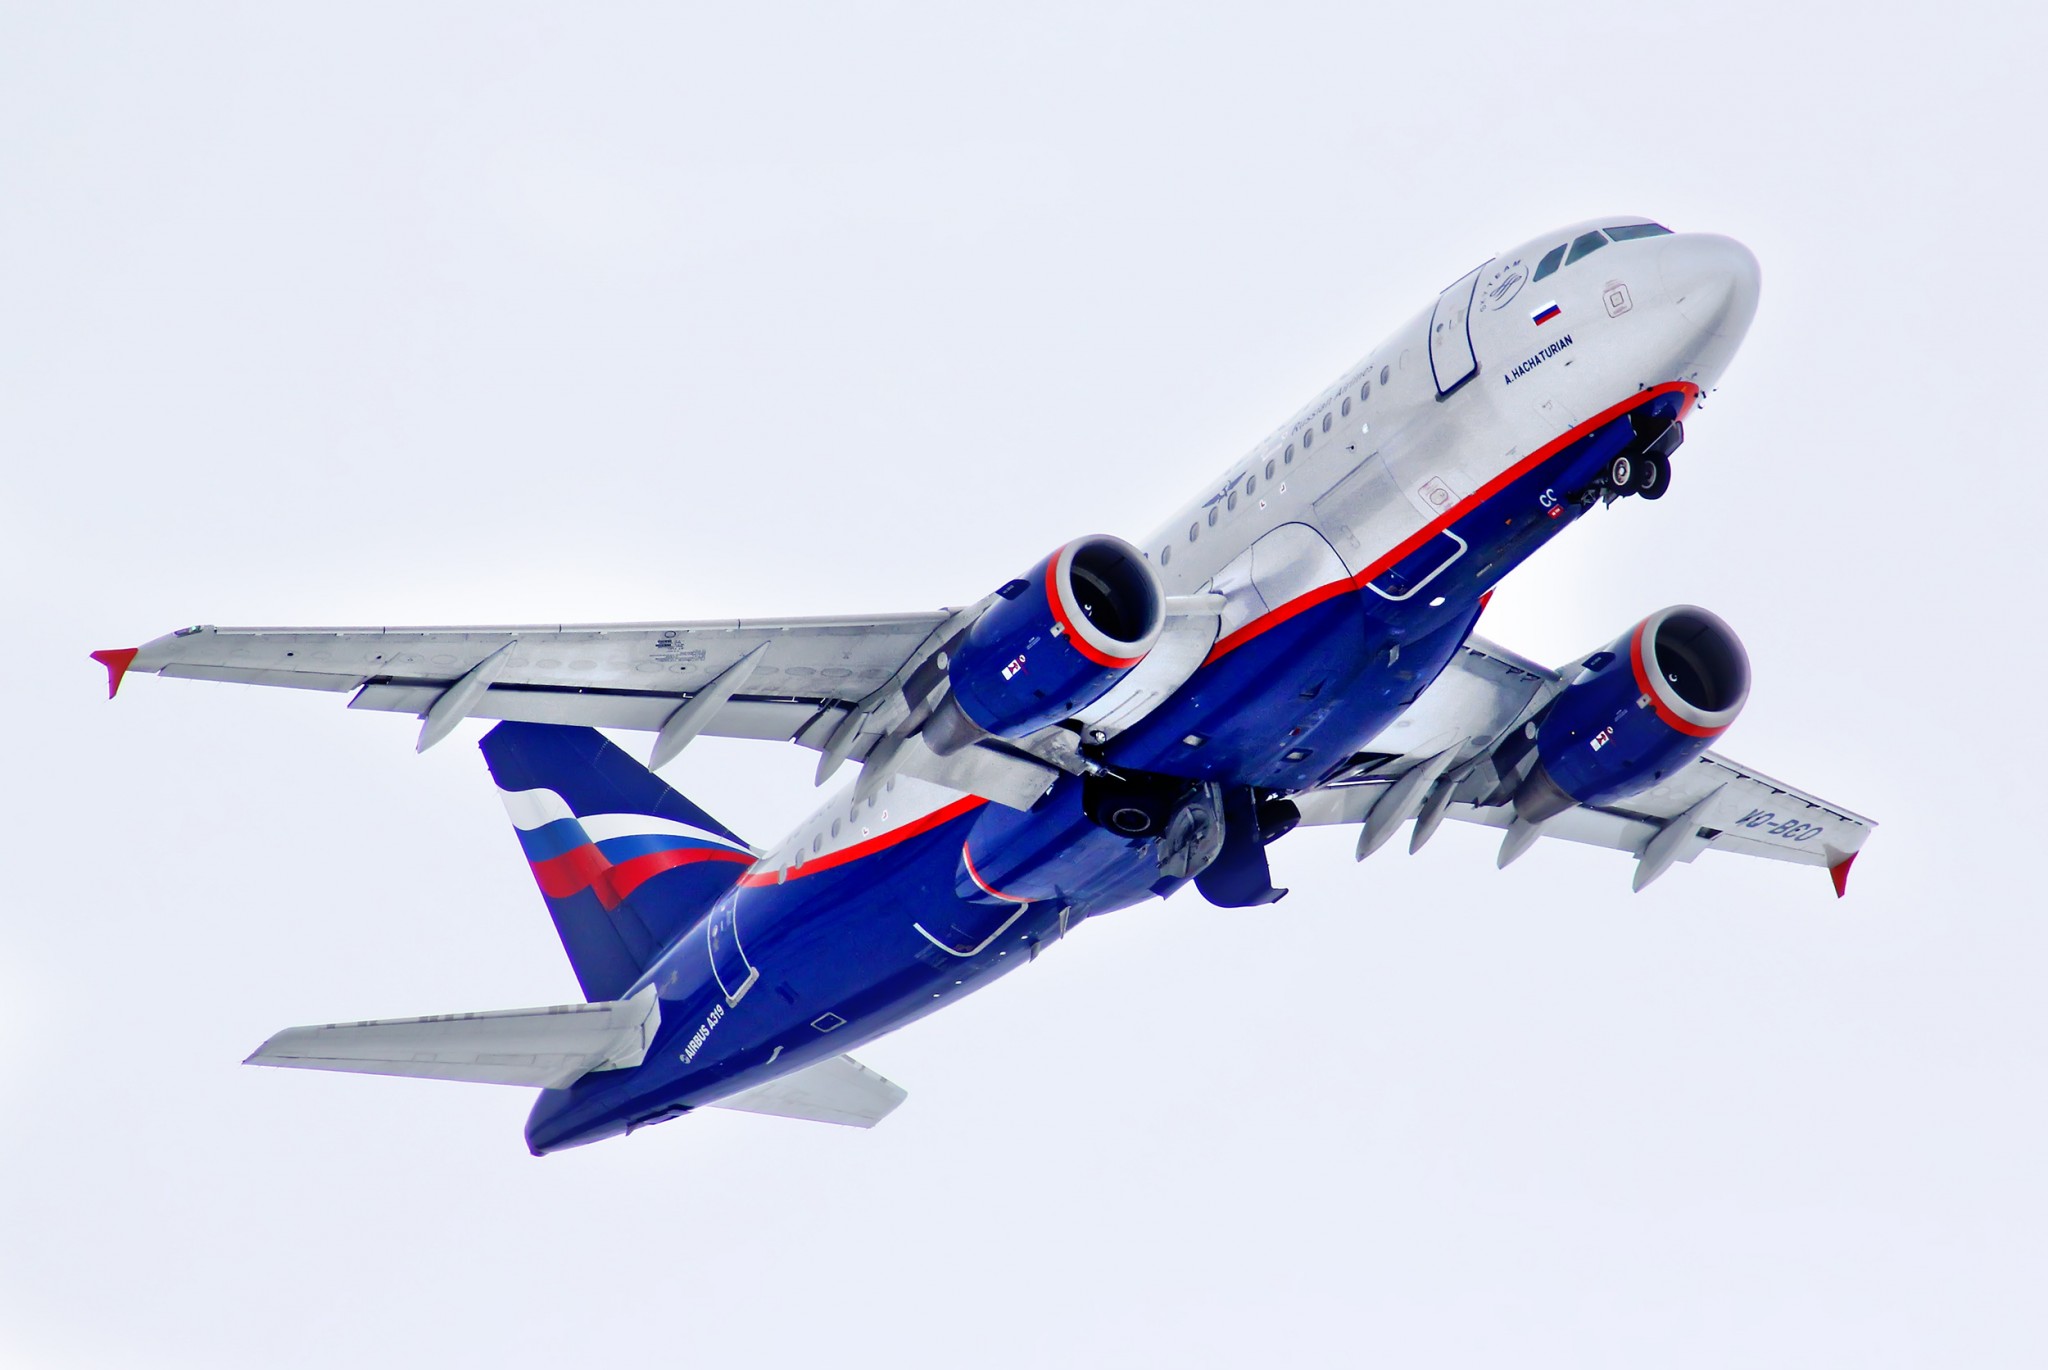 Russian airlines to increase passenger numbers by 100 million